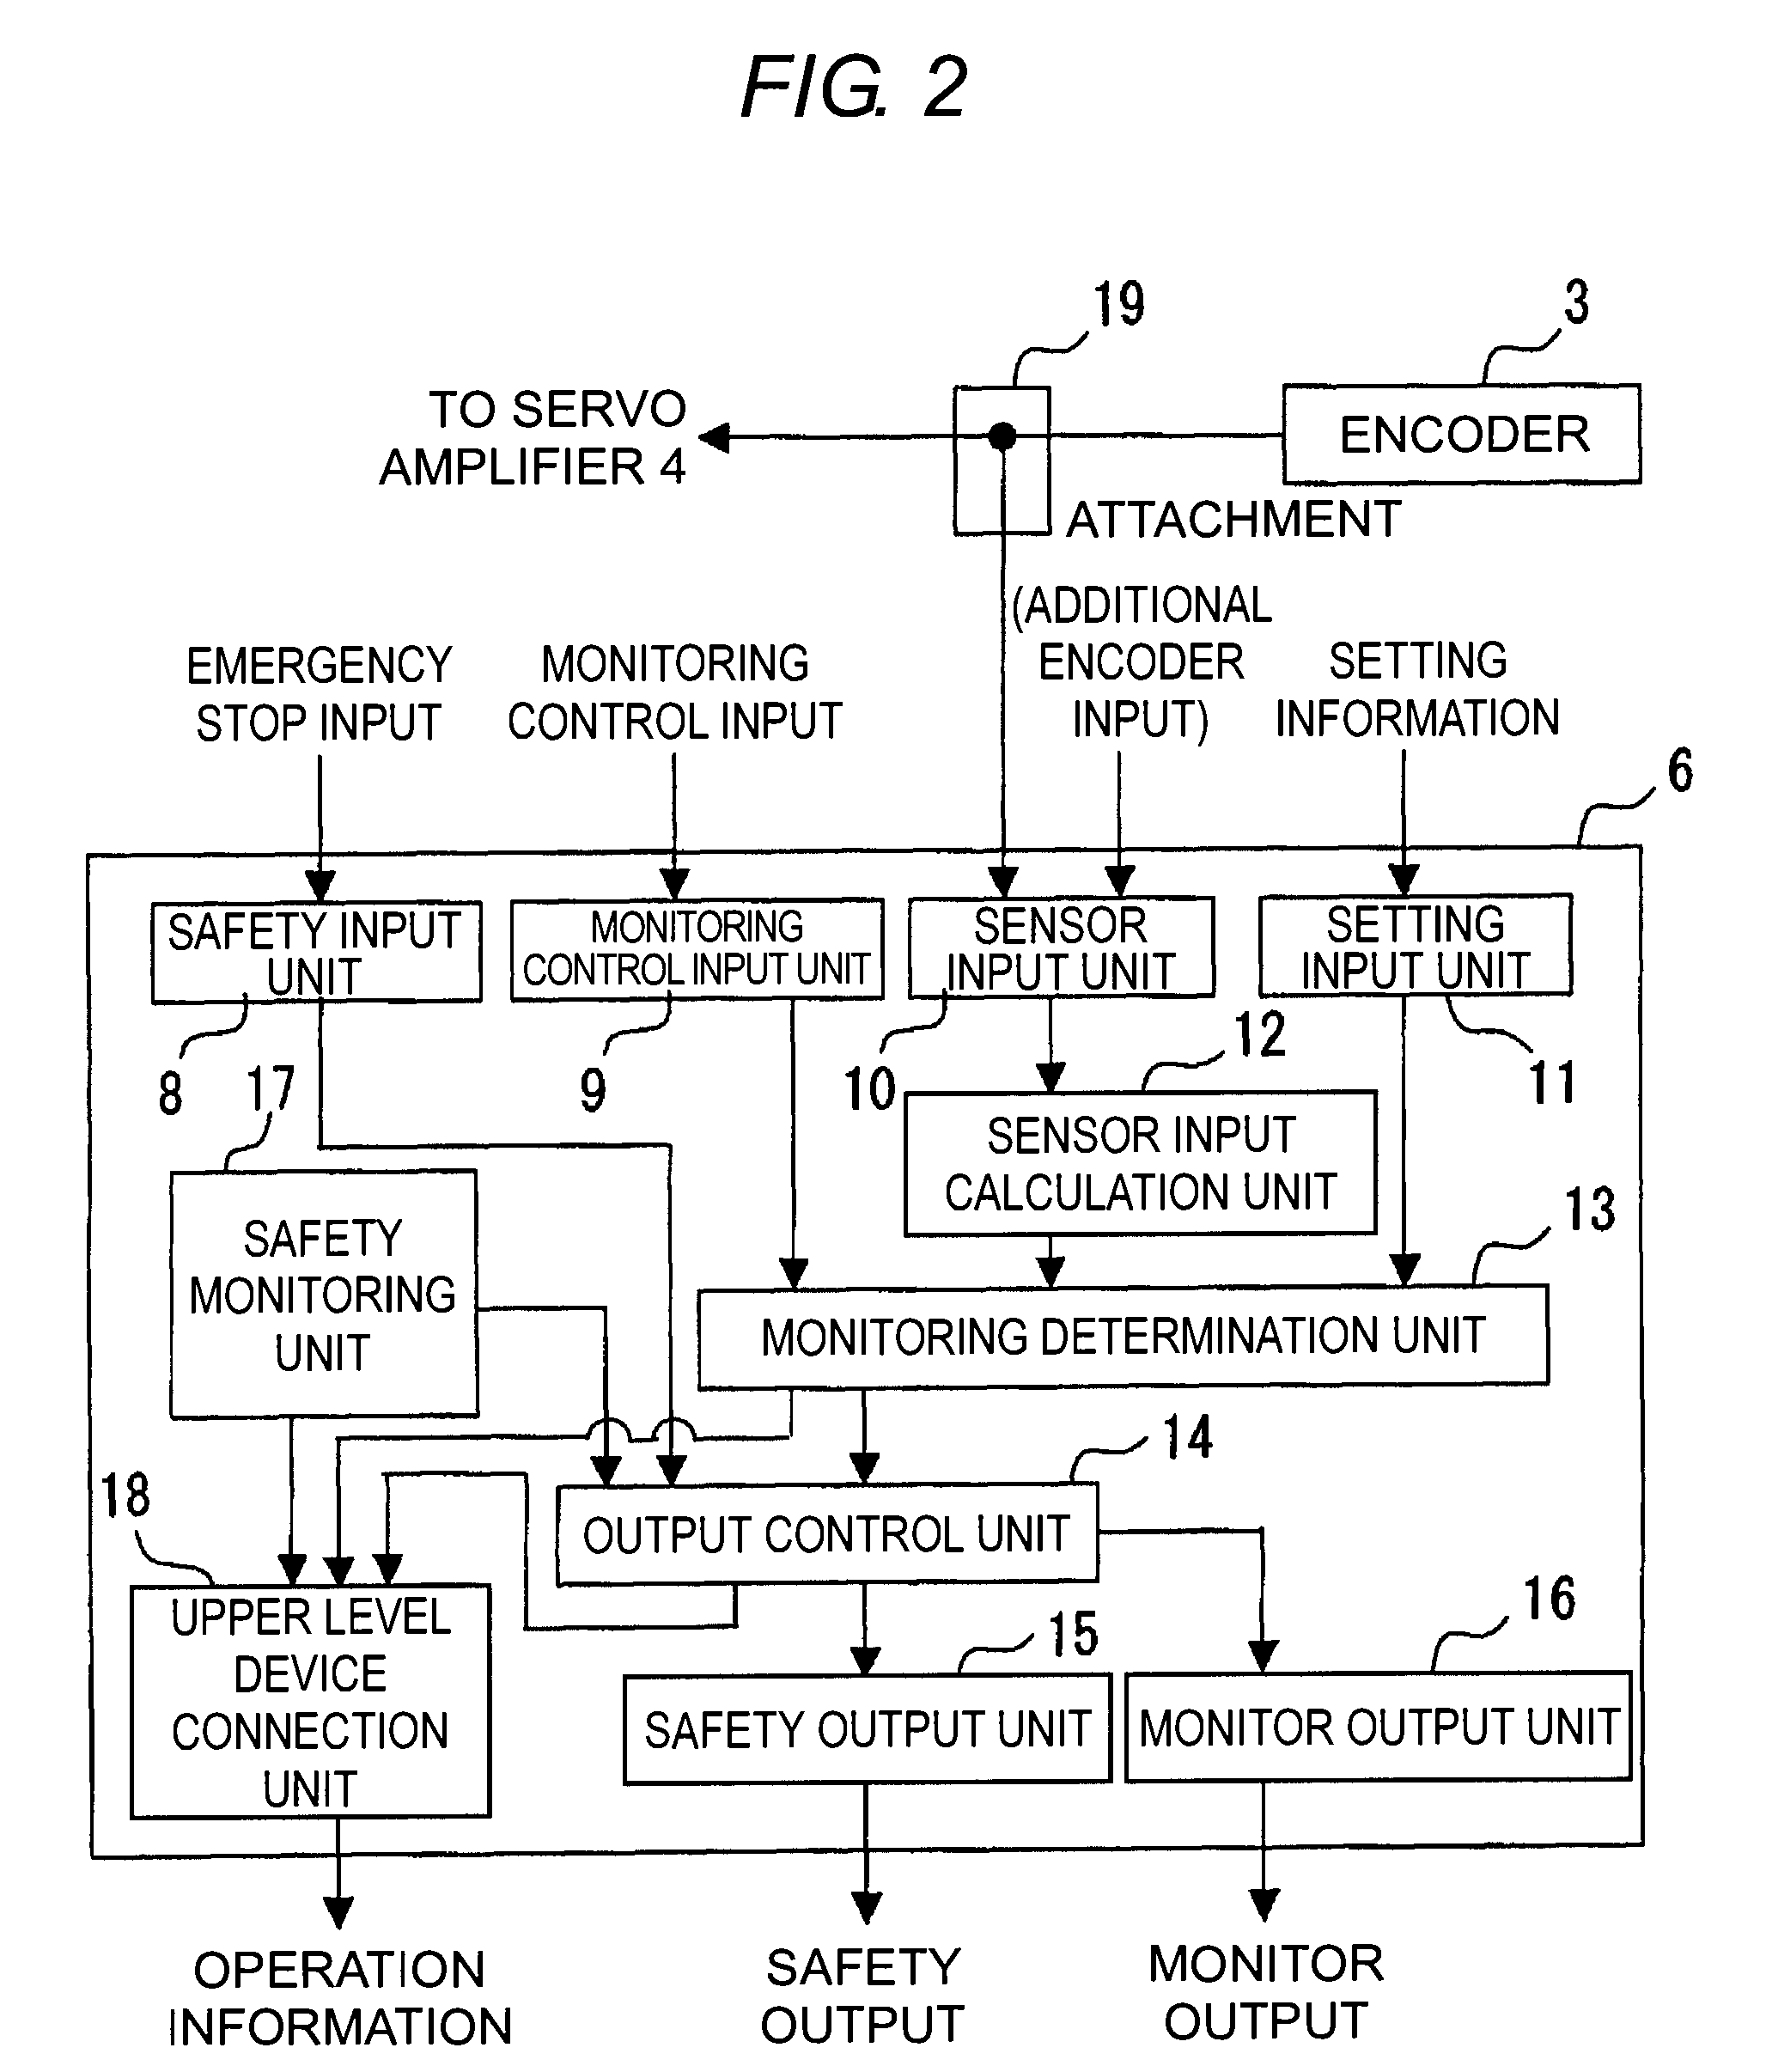 Servo system and safety control device